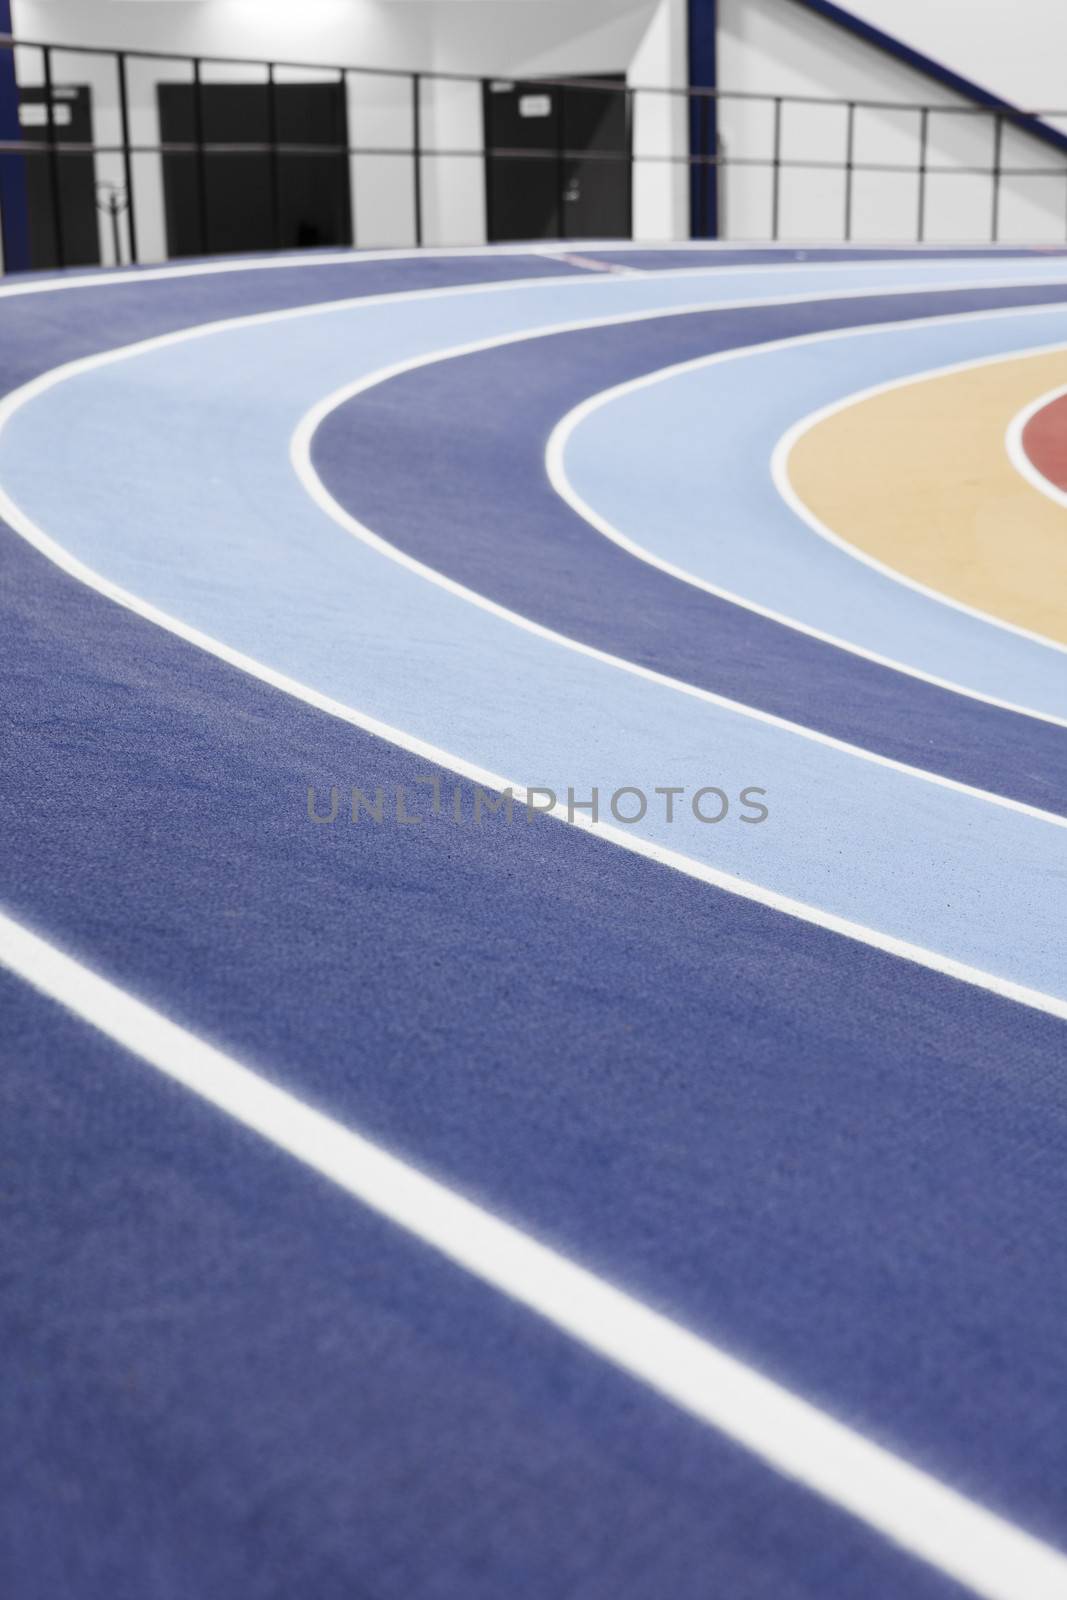 Detail from a Athletics arena indoor